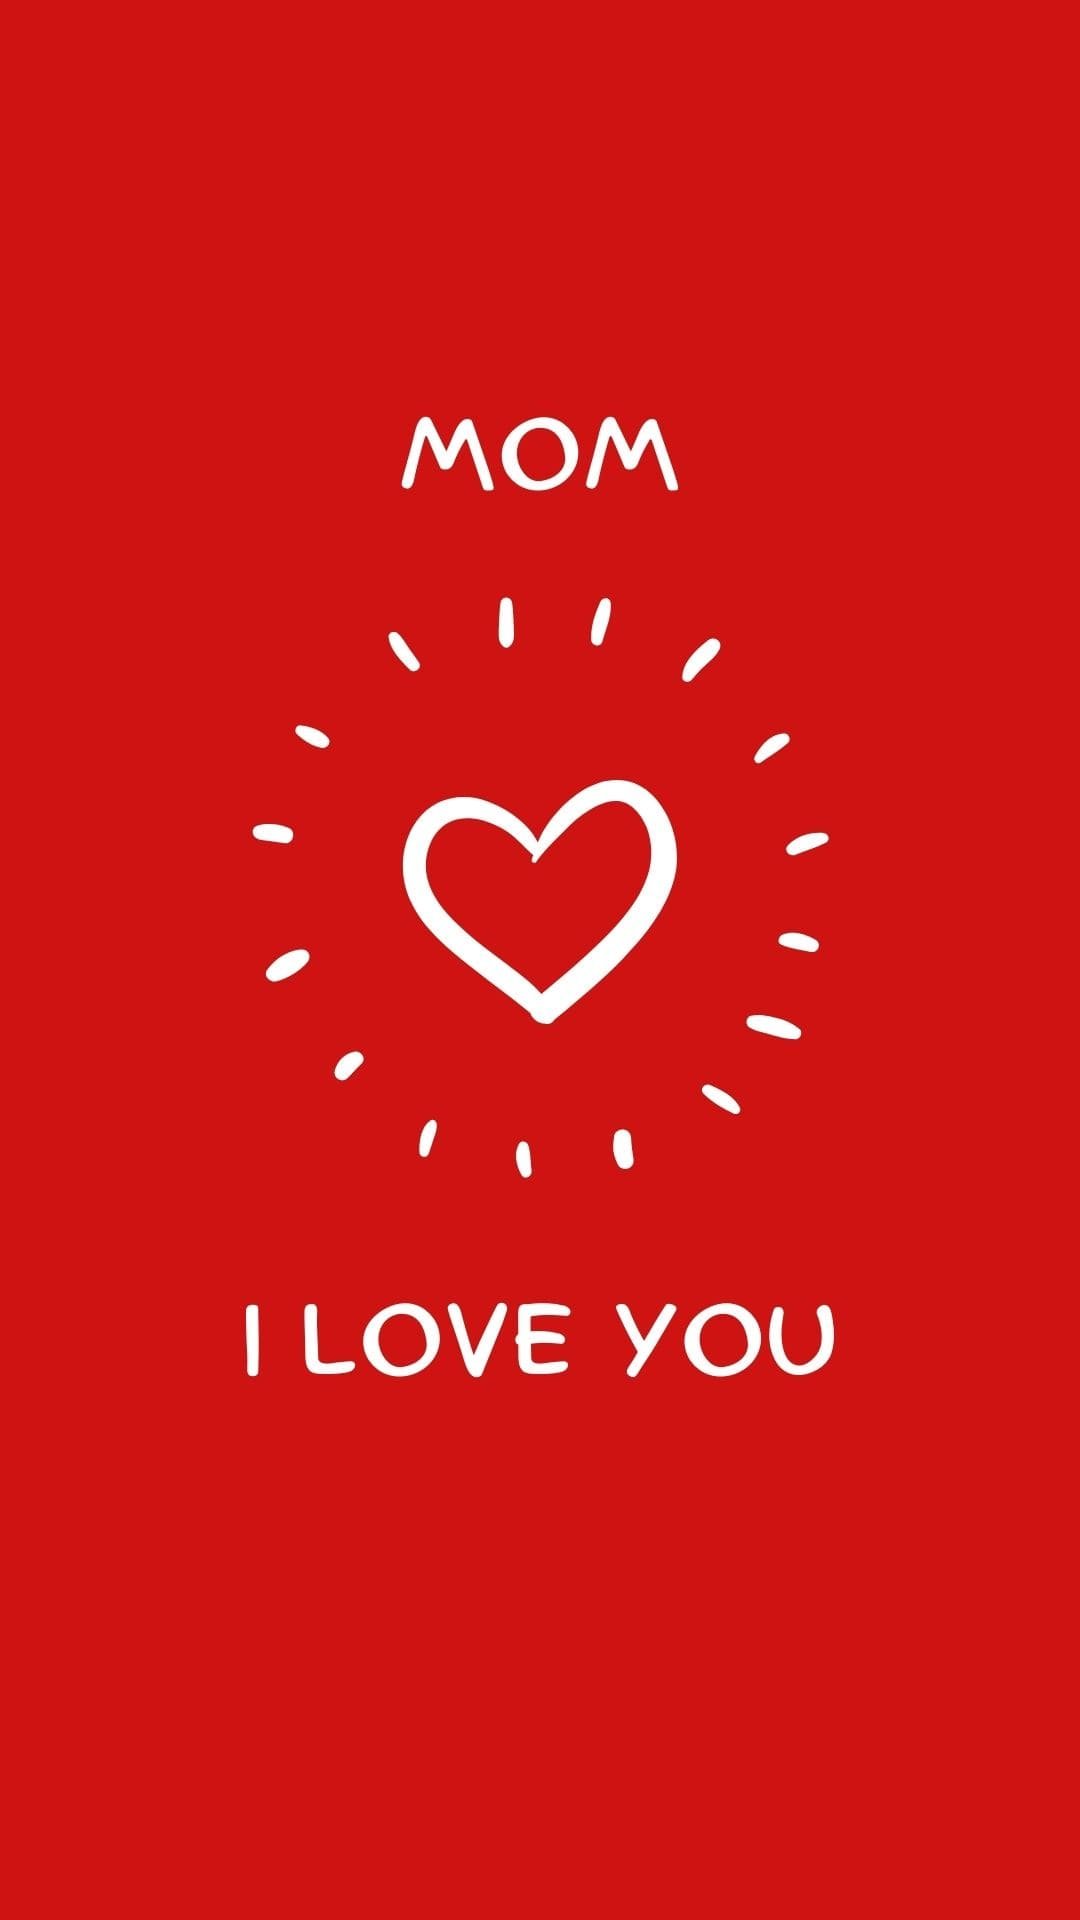 happy mothers day images best mom ever pink heart 2022 iphone 13 pro max wallpaper 11